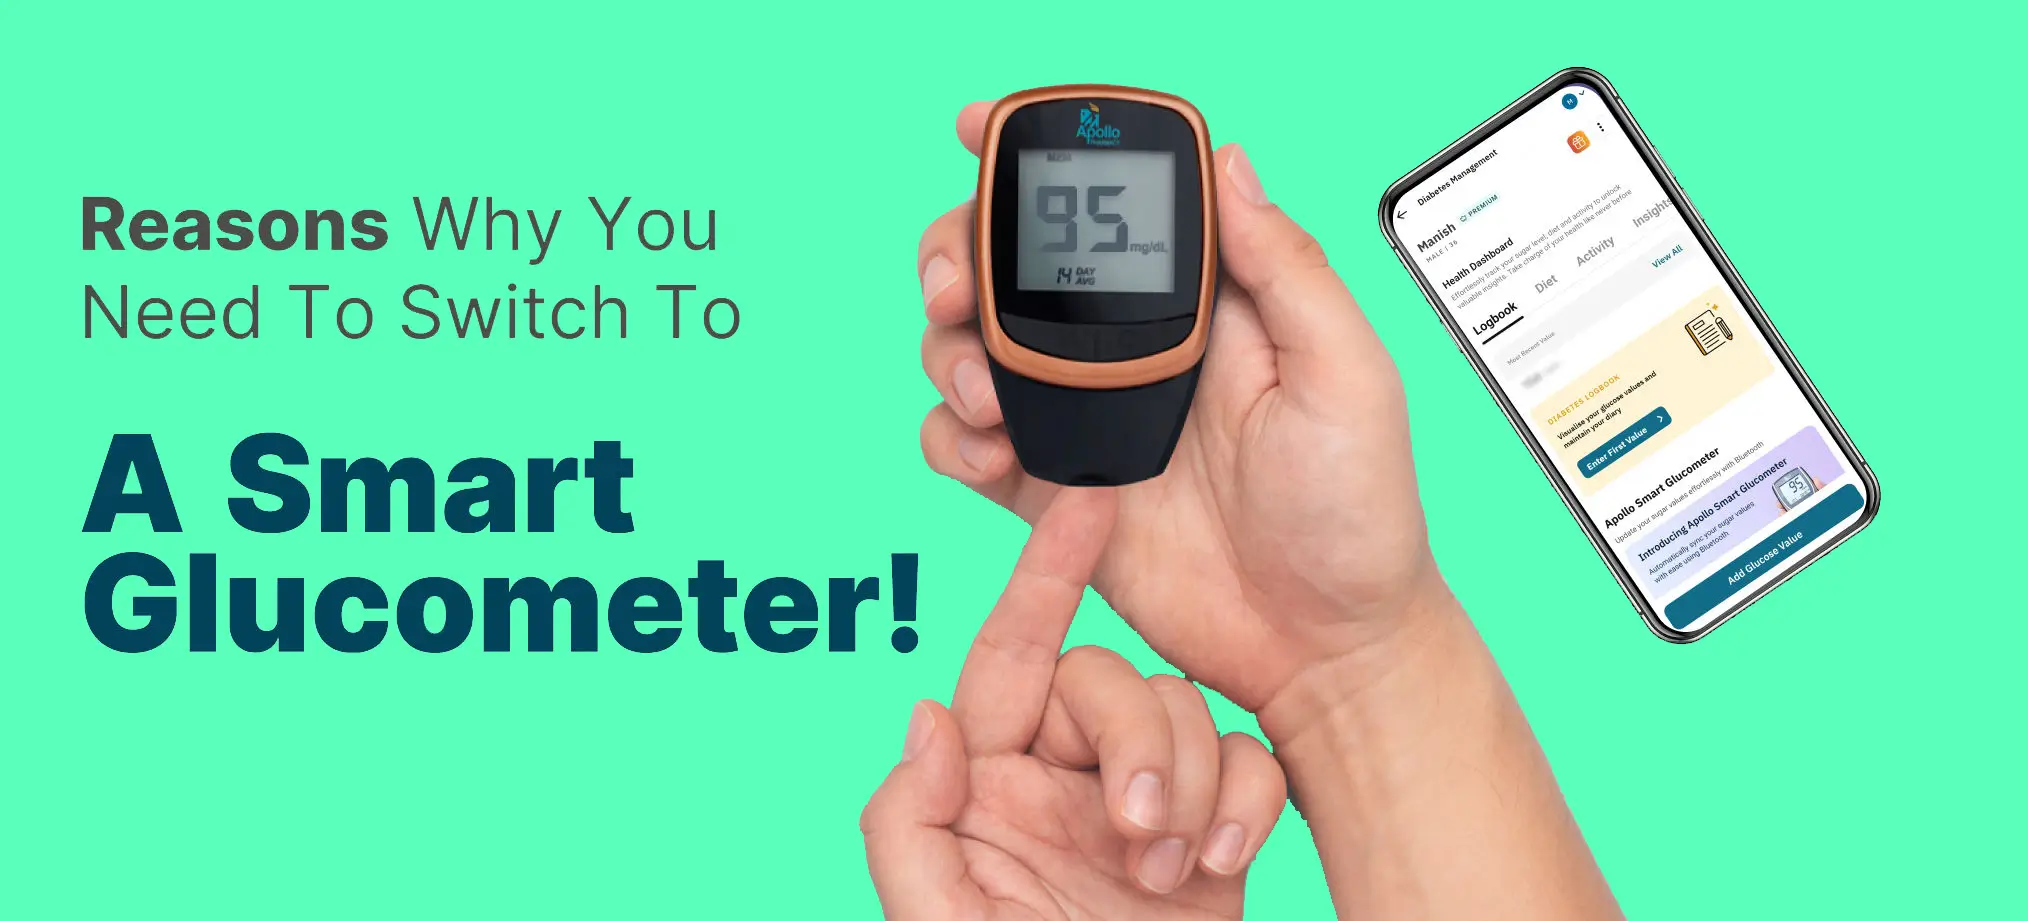 Don’t Buy Glucose Test Strips: Upgrade To A Smart Glucometer At The Same Price